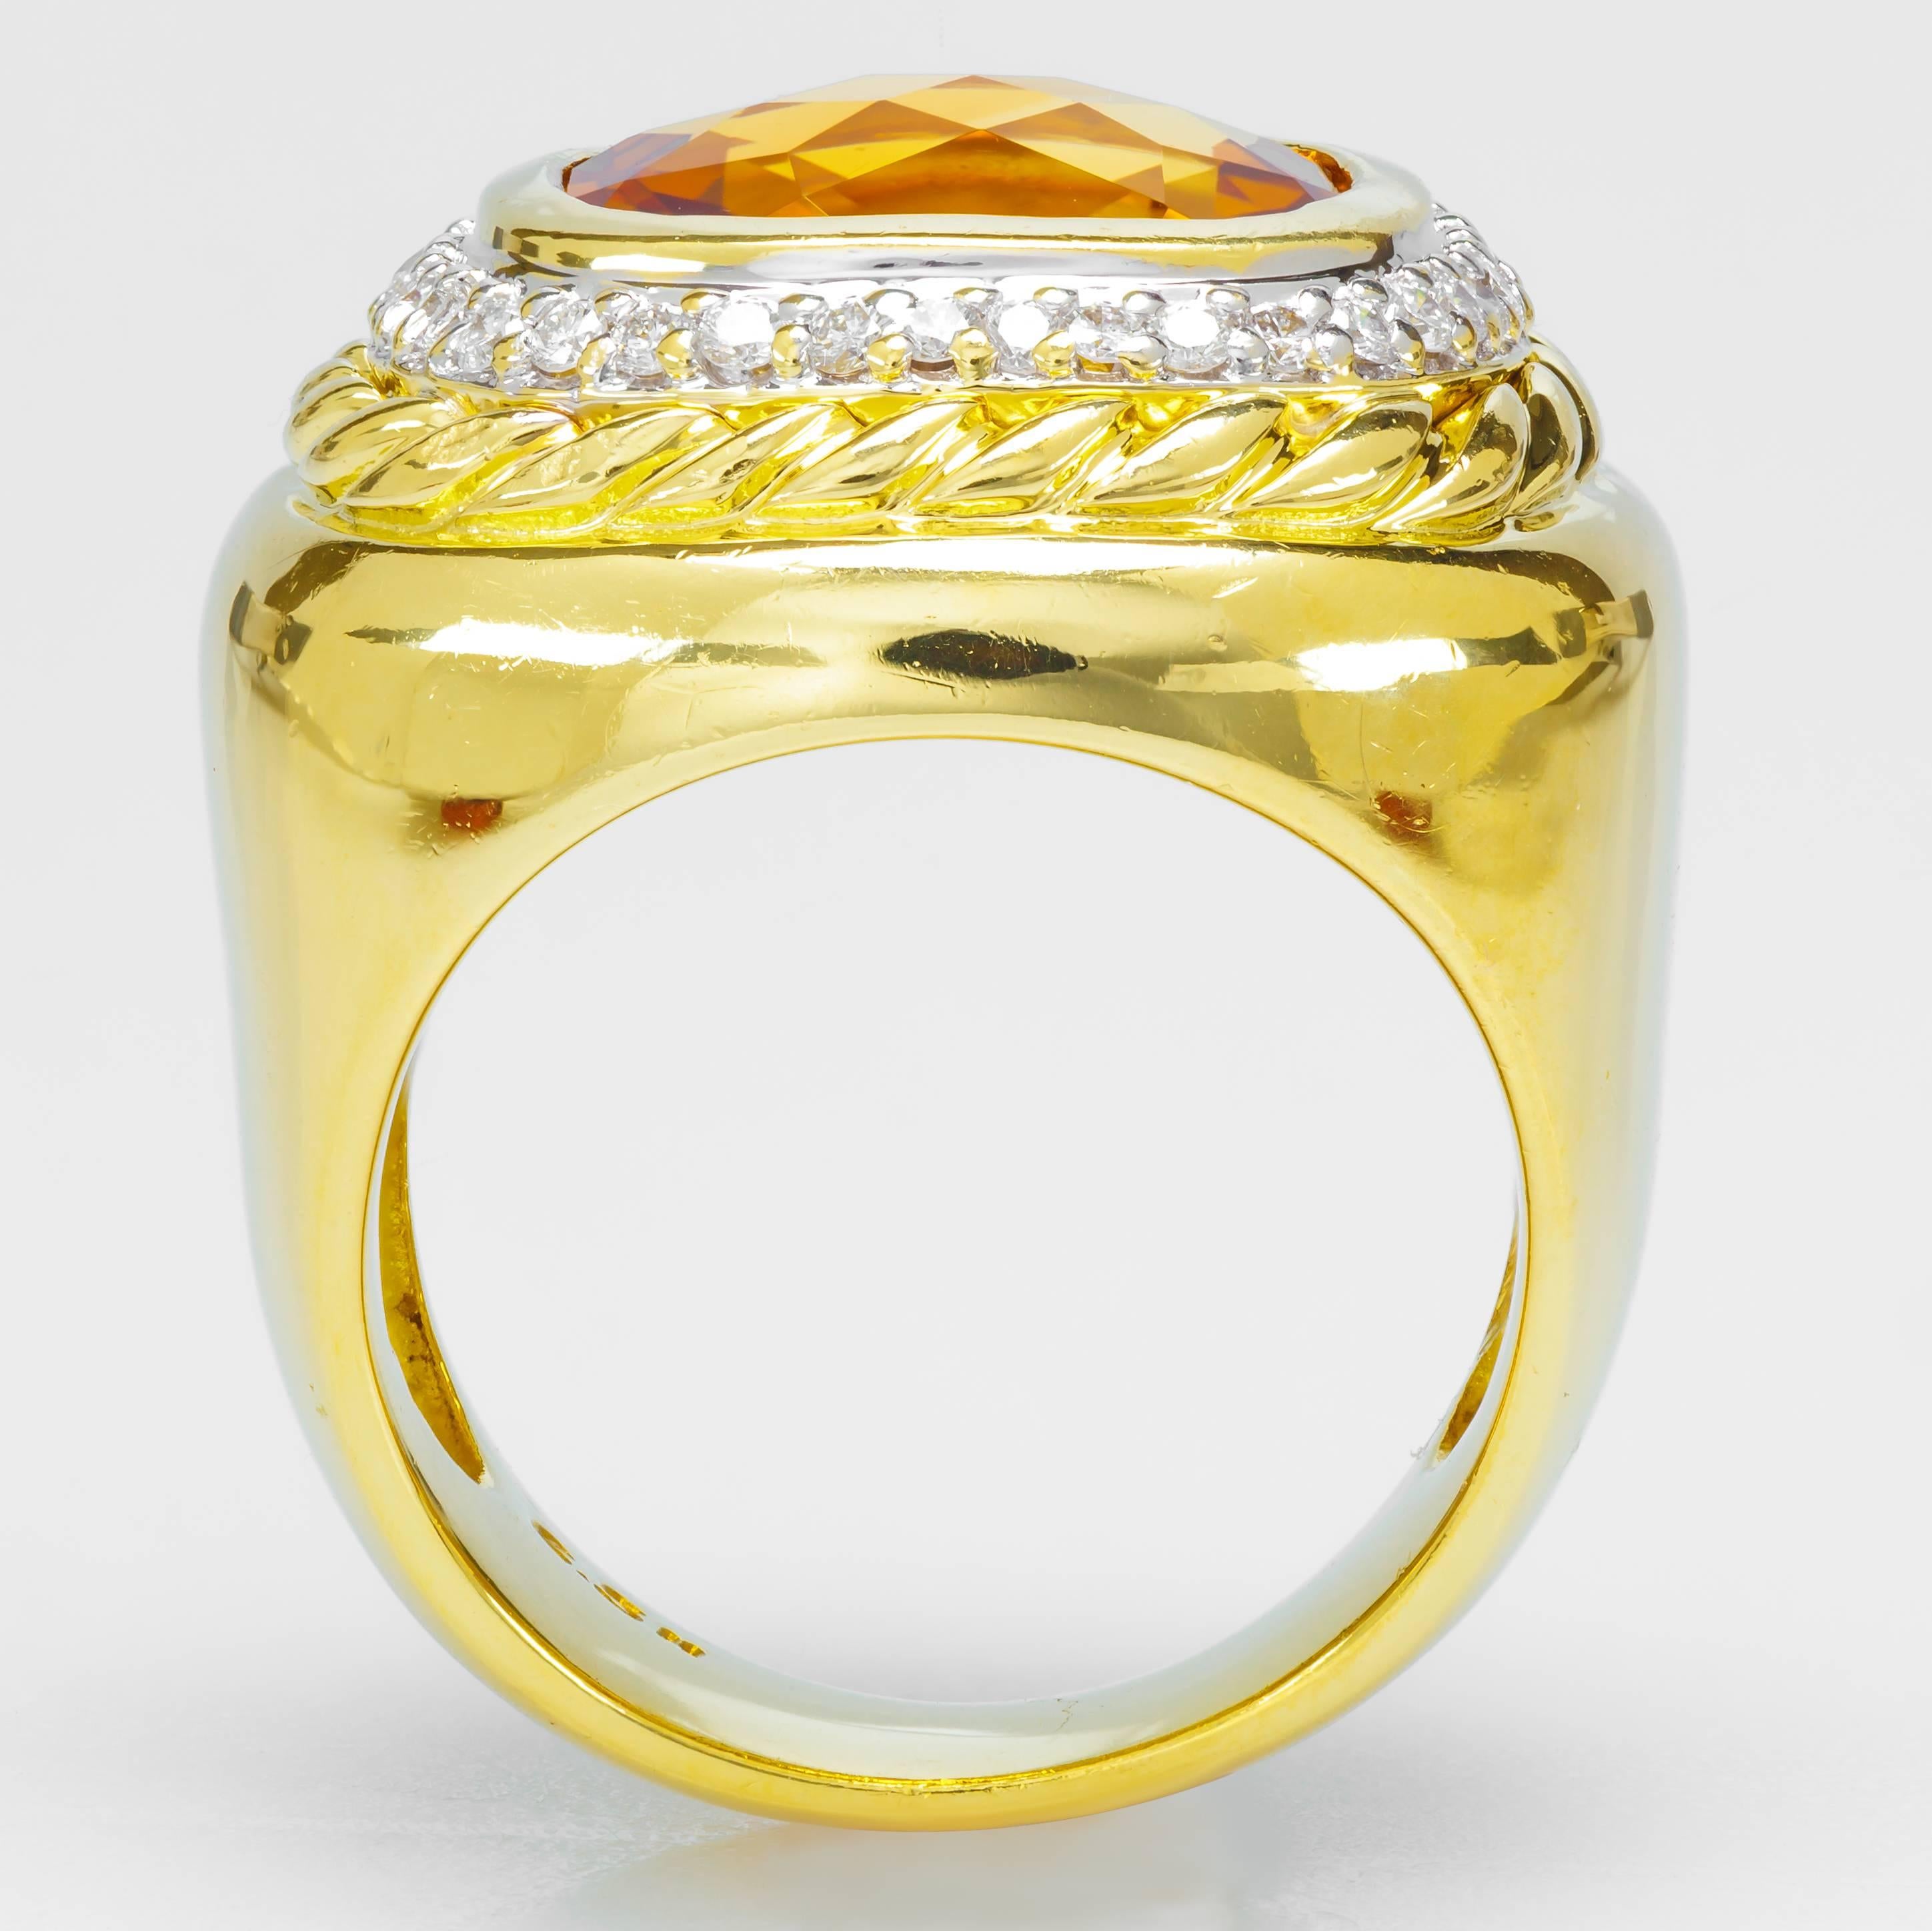 This 18k yellow gold and sterling silver David Yurman ring holds a bezel-set citrine and 38 round diamonds.  It features a smooth shank and a braided design. The inside of the band is stamped with 750 and the David Yurman signature.  It is a size